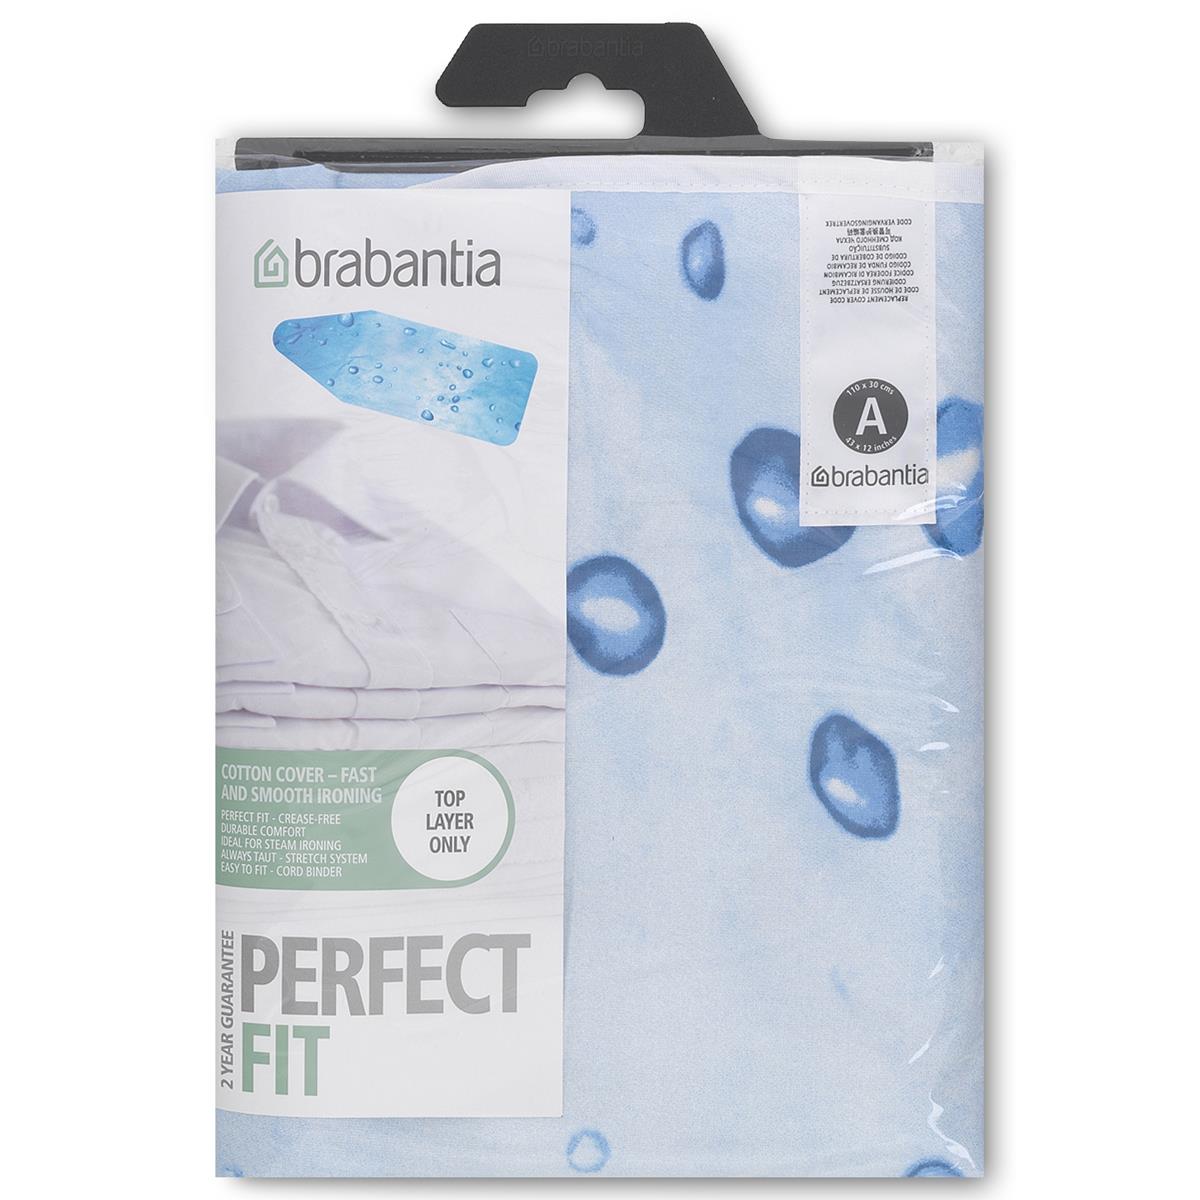 Brabantia Size A Ironing Board Cover Assorted Designs Questions & Answers